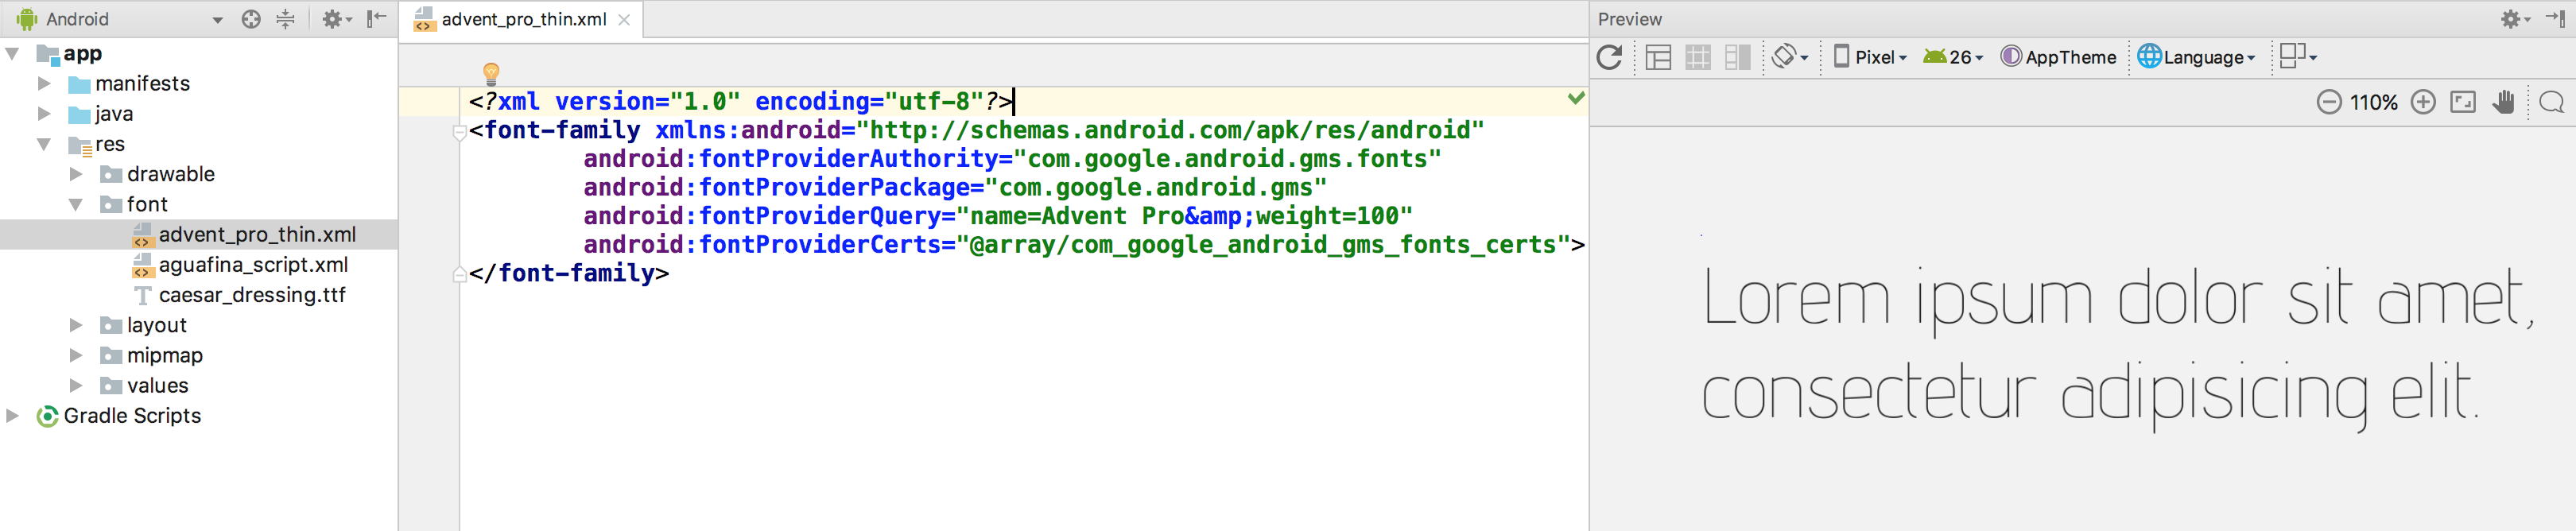 Downloadable Fonts | Android Developers